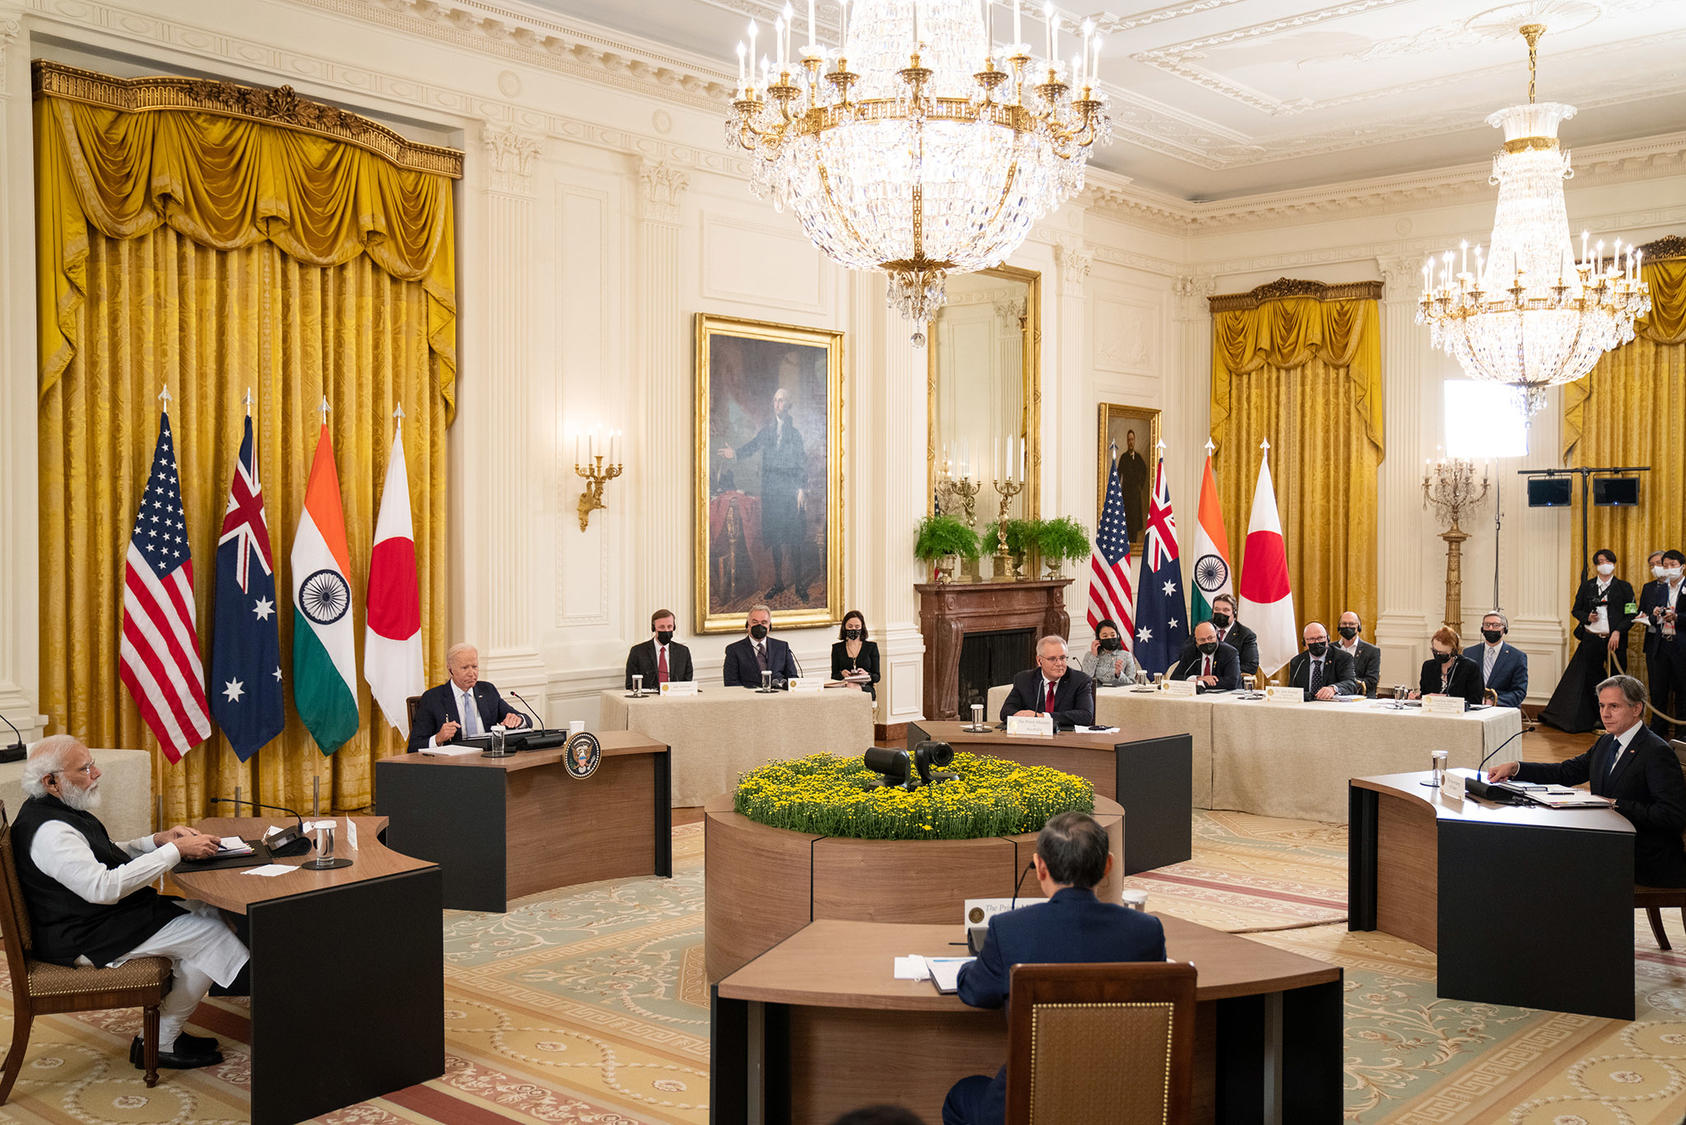 The prime ministers of India, Australia and Japan meet with President Joe Biden and Secretary of State Antony Blinken at the White House for the Quad Leaders’ Summit. September 24, 2021. (Sarahbeth Maney/The New York Times)